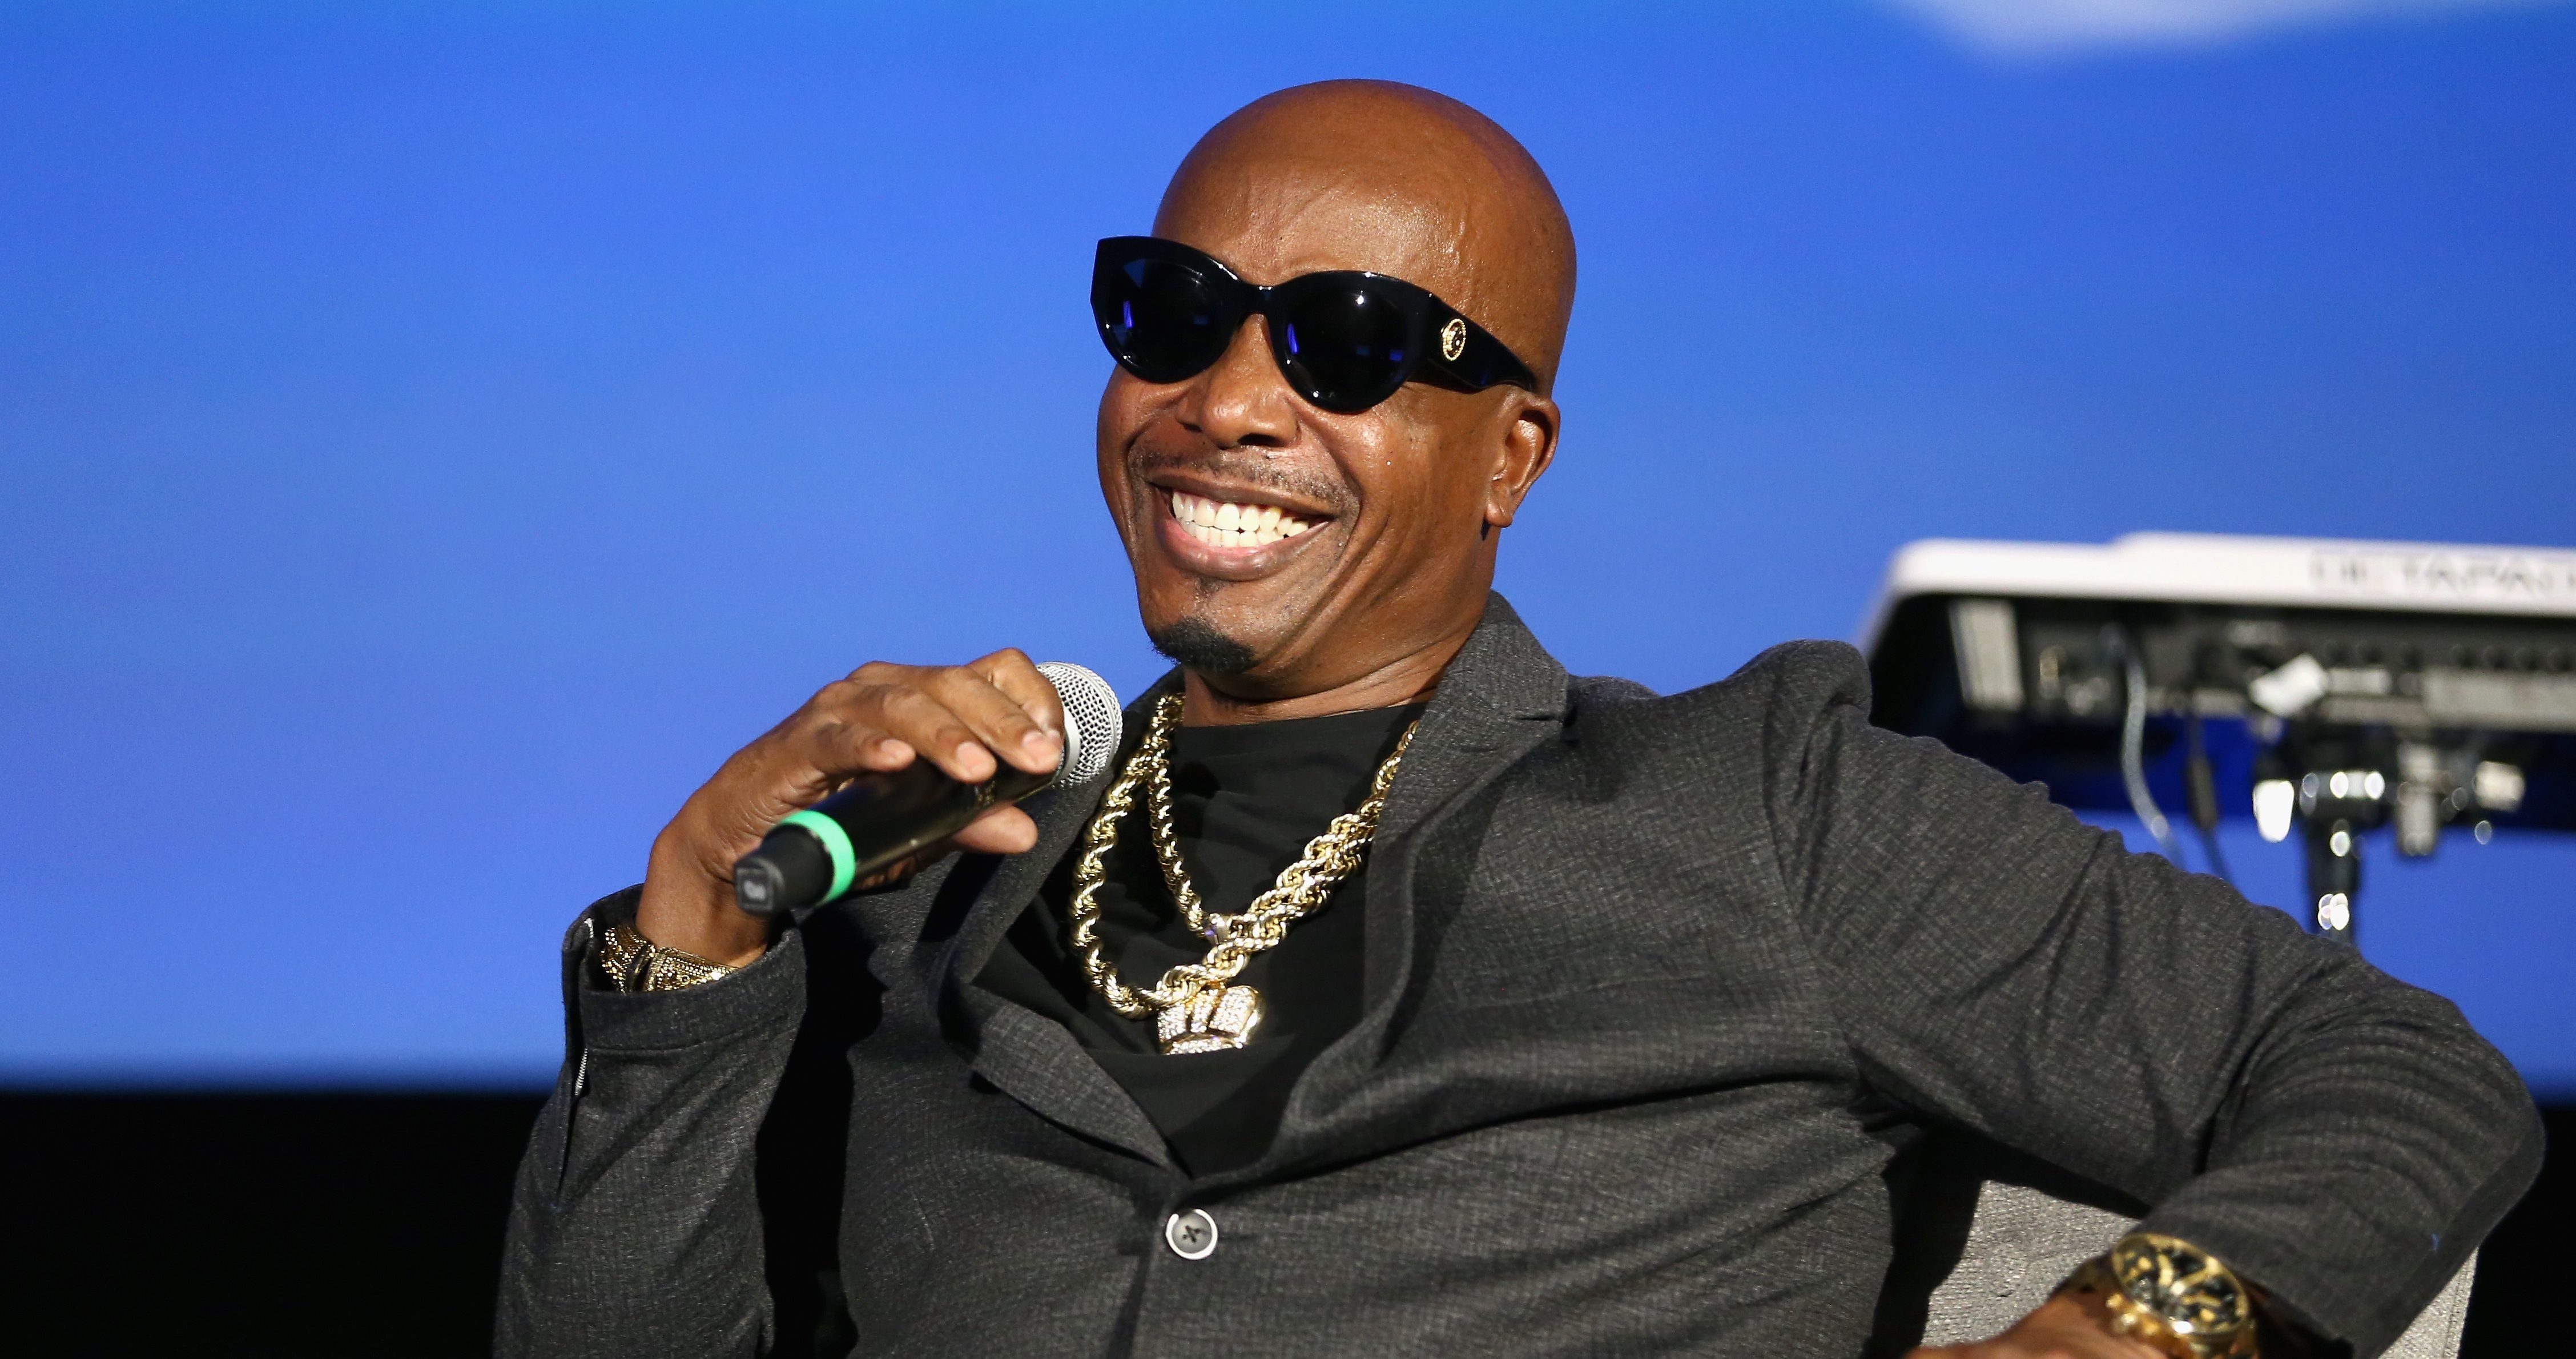 MC Hammer at Capitol Music Group's 5th Annual Capitol Congress Where They Premiered New Music And Projects For Industry And Media